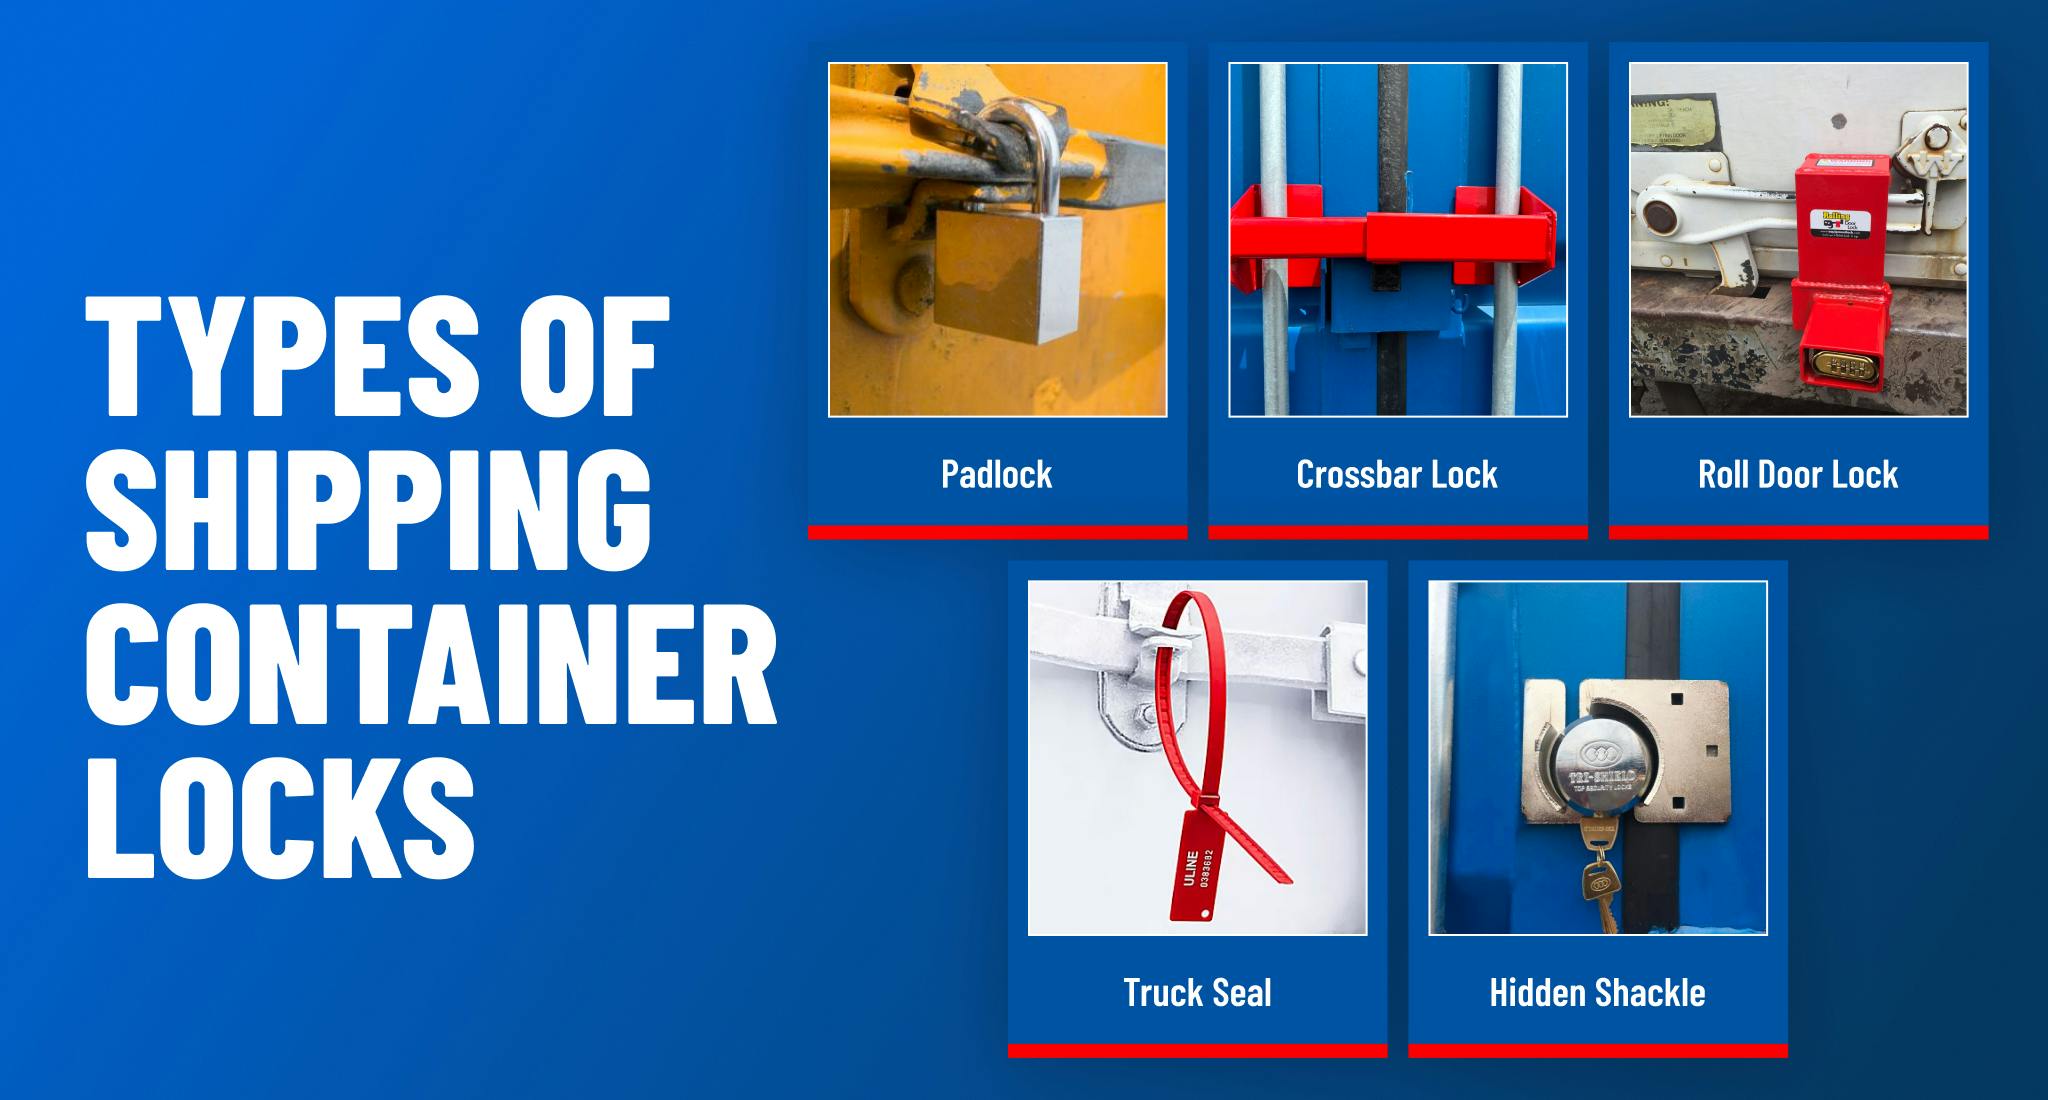 Types of shipping container locks. 